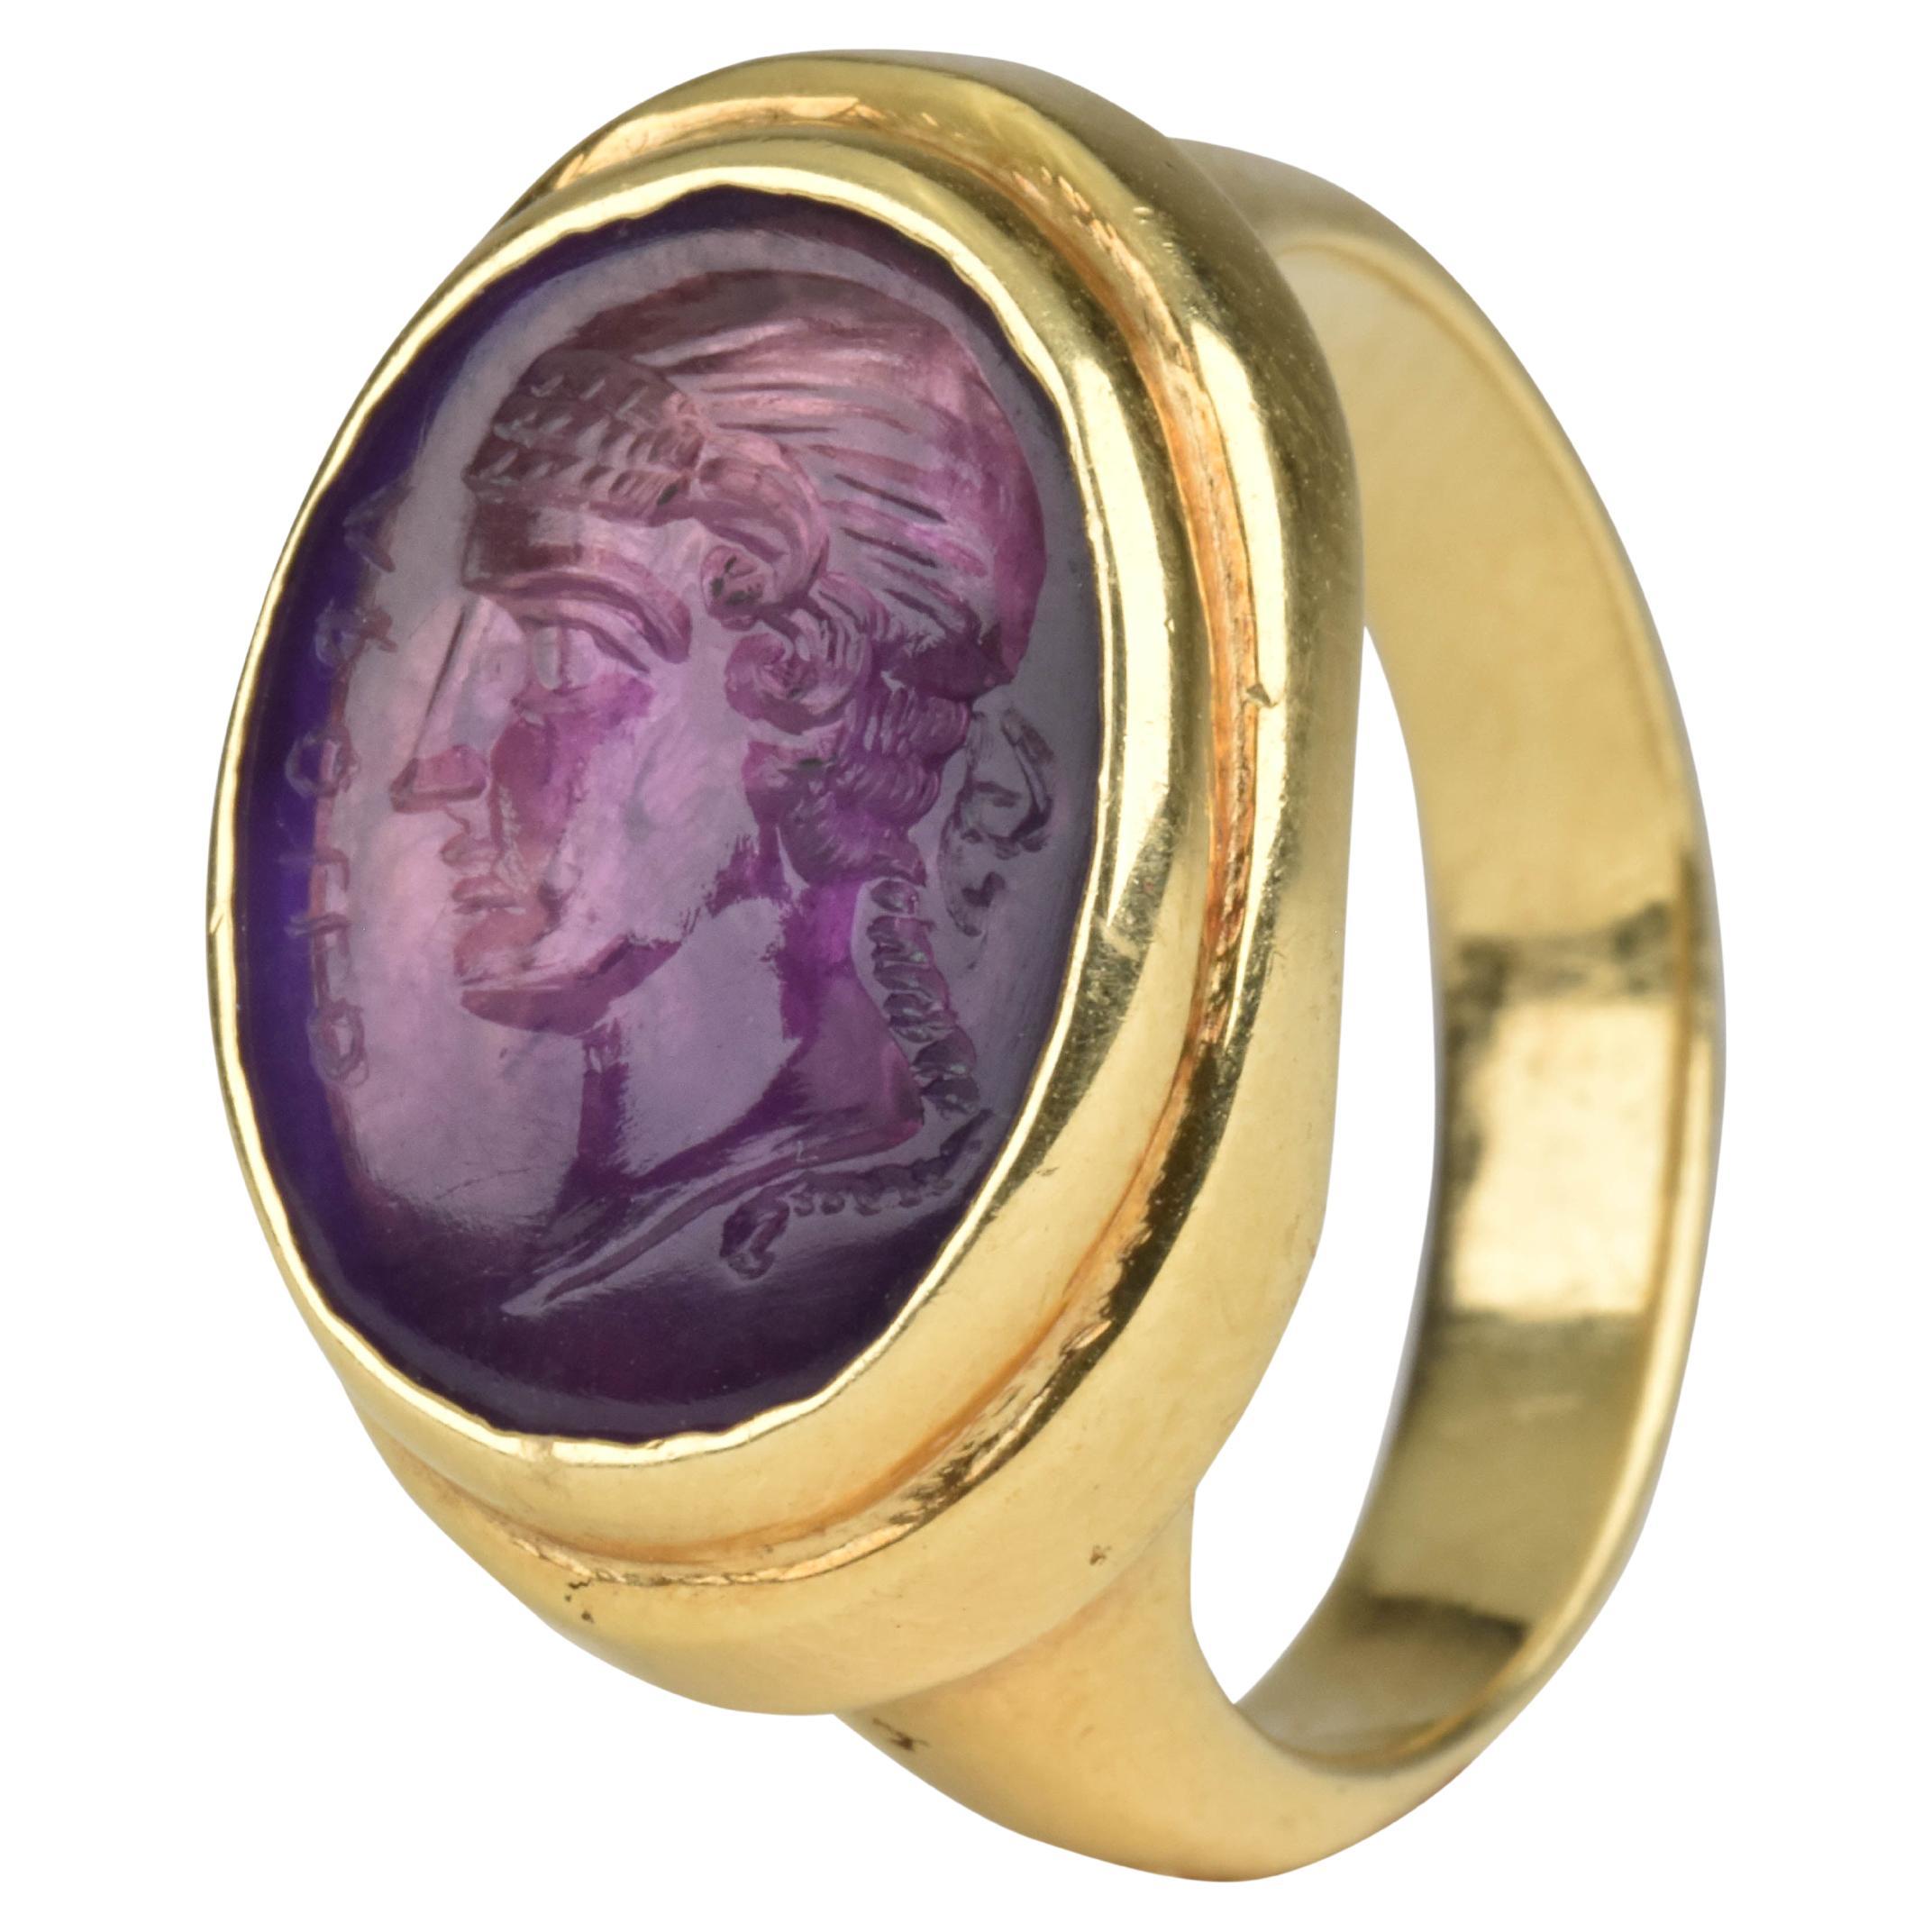 Ancient Roman Portrait Amethyst Intaglio in a Neo-Classical Gold Signet Ring